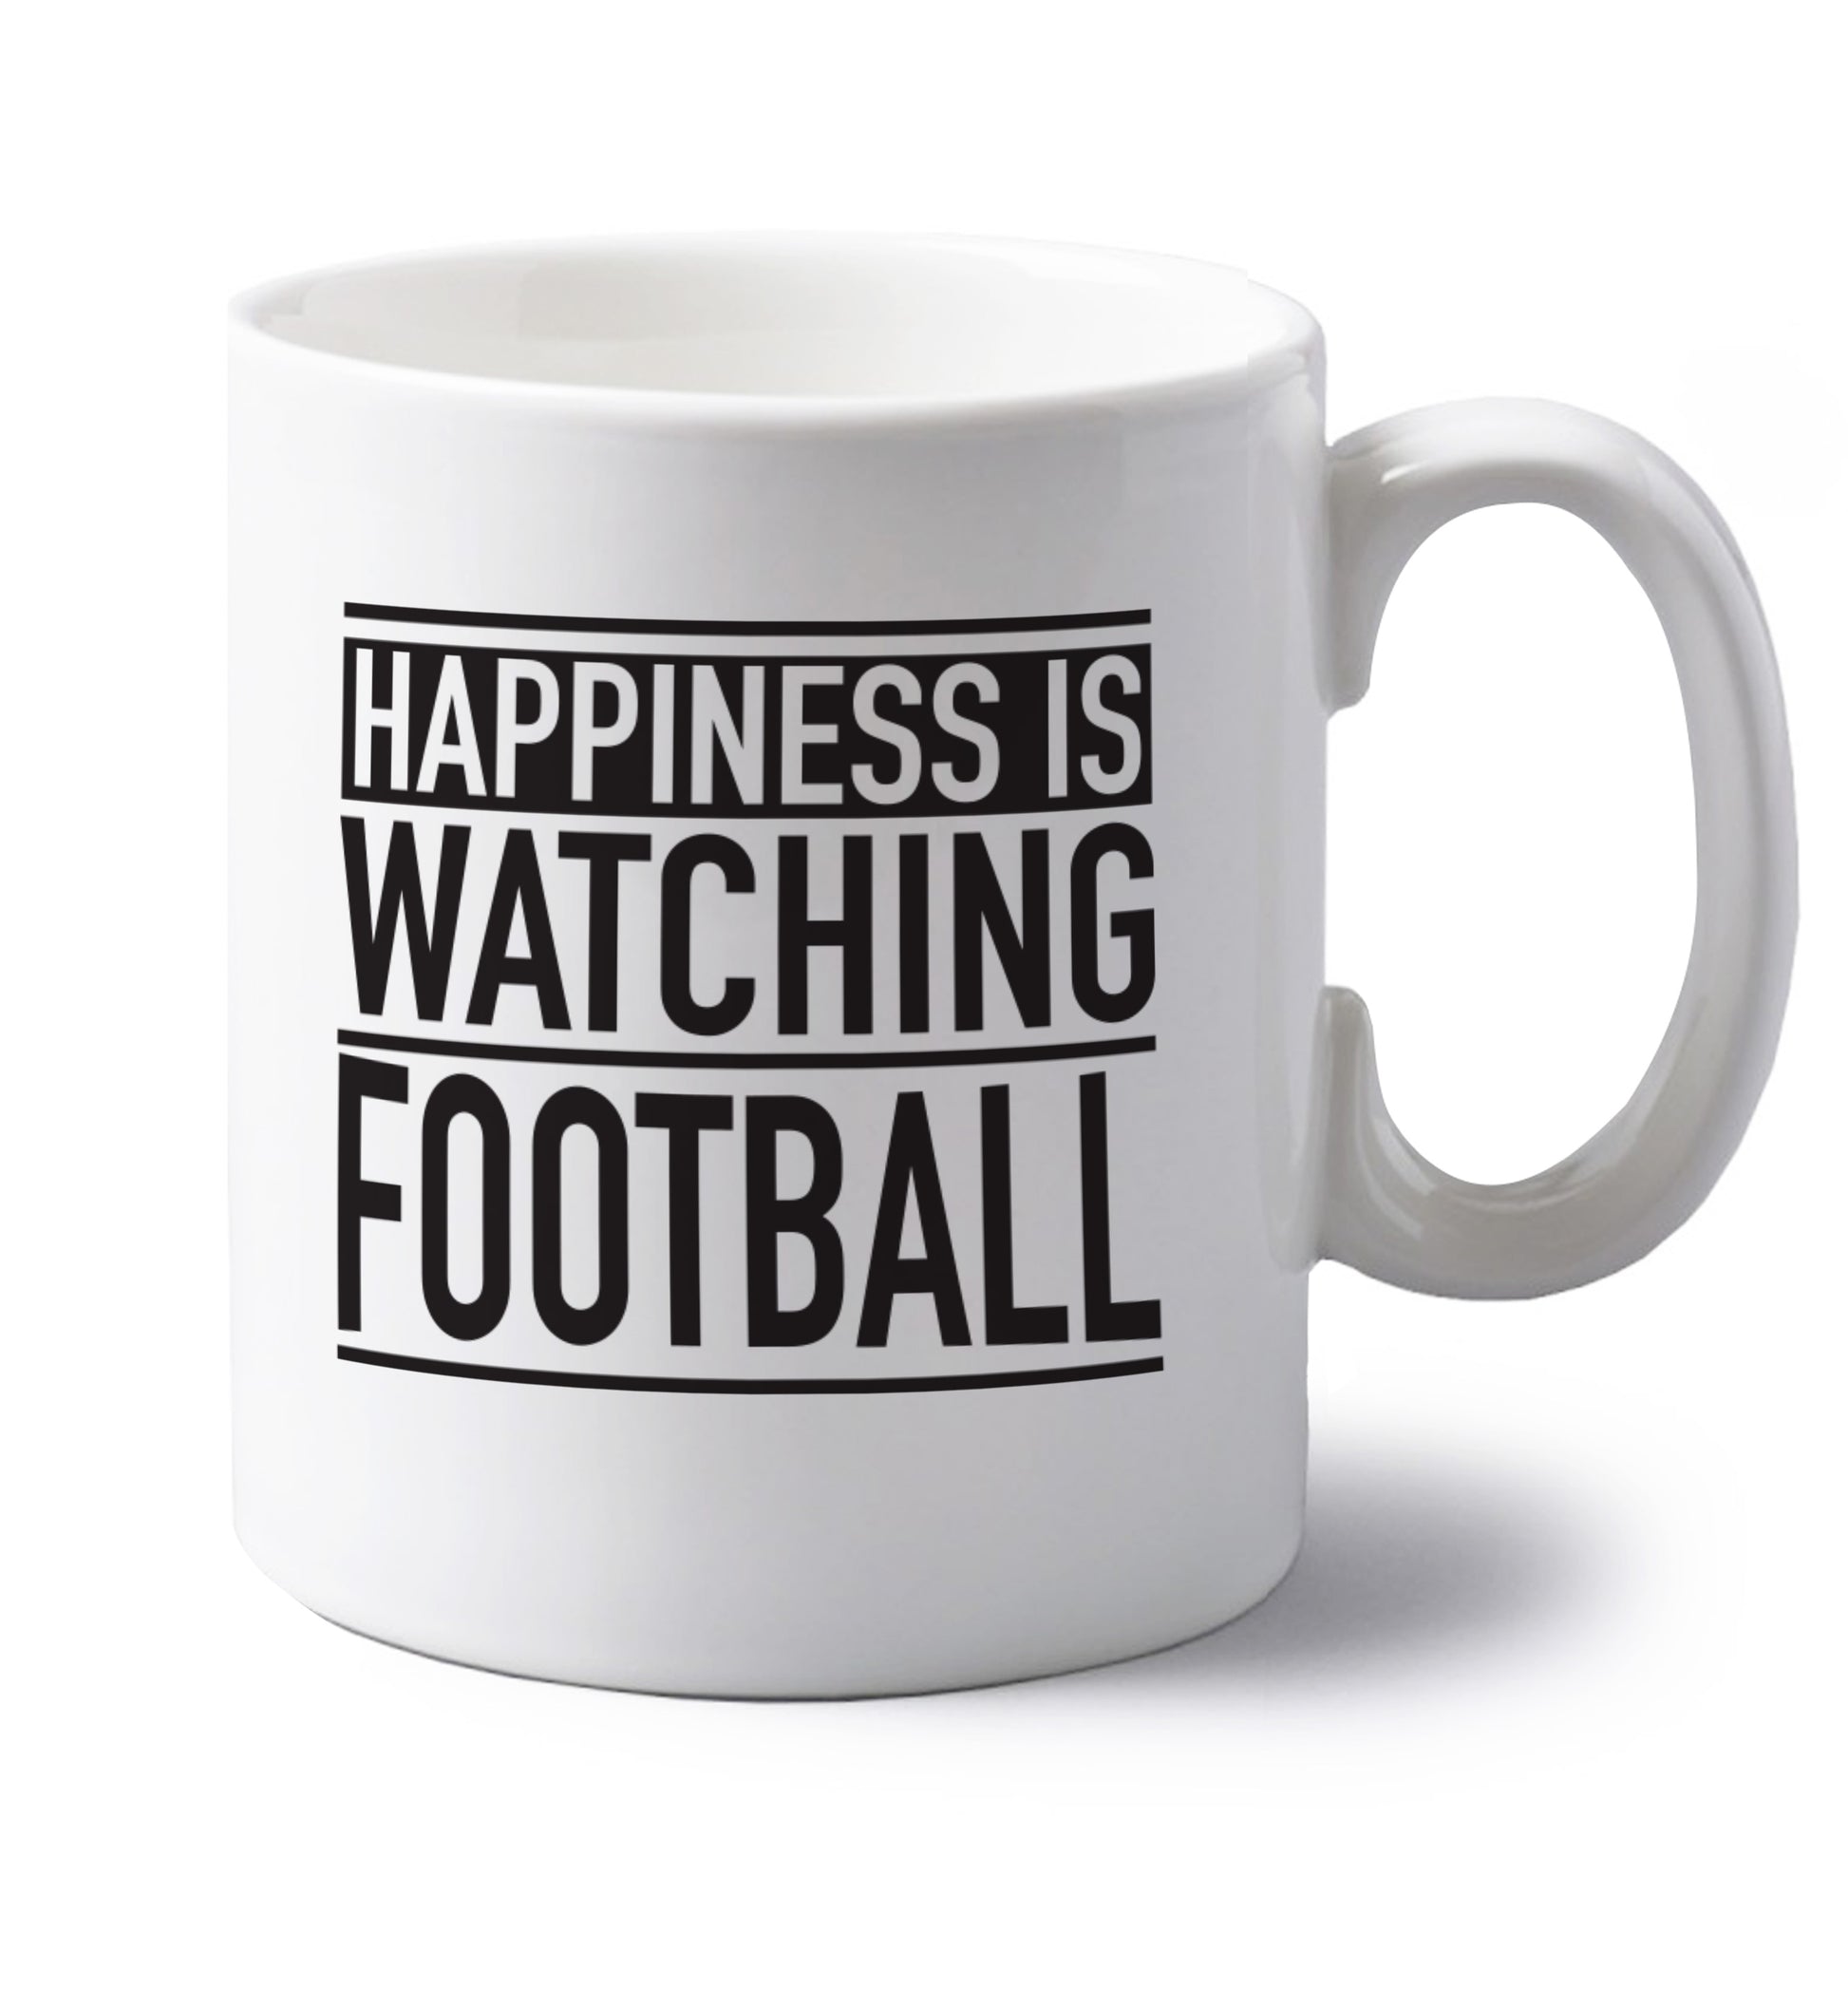 Happiness is watching football left handed white ceramic mug 